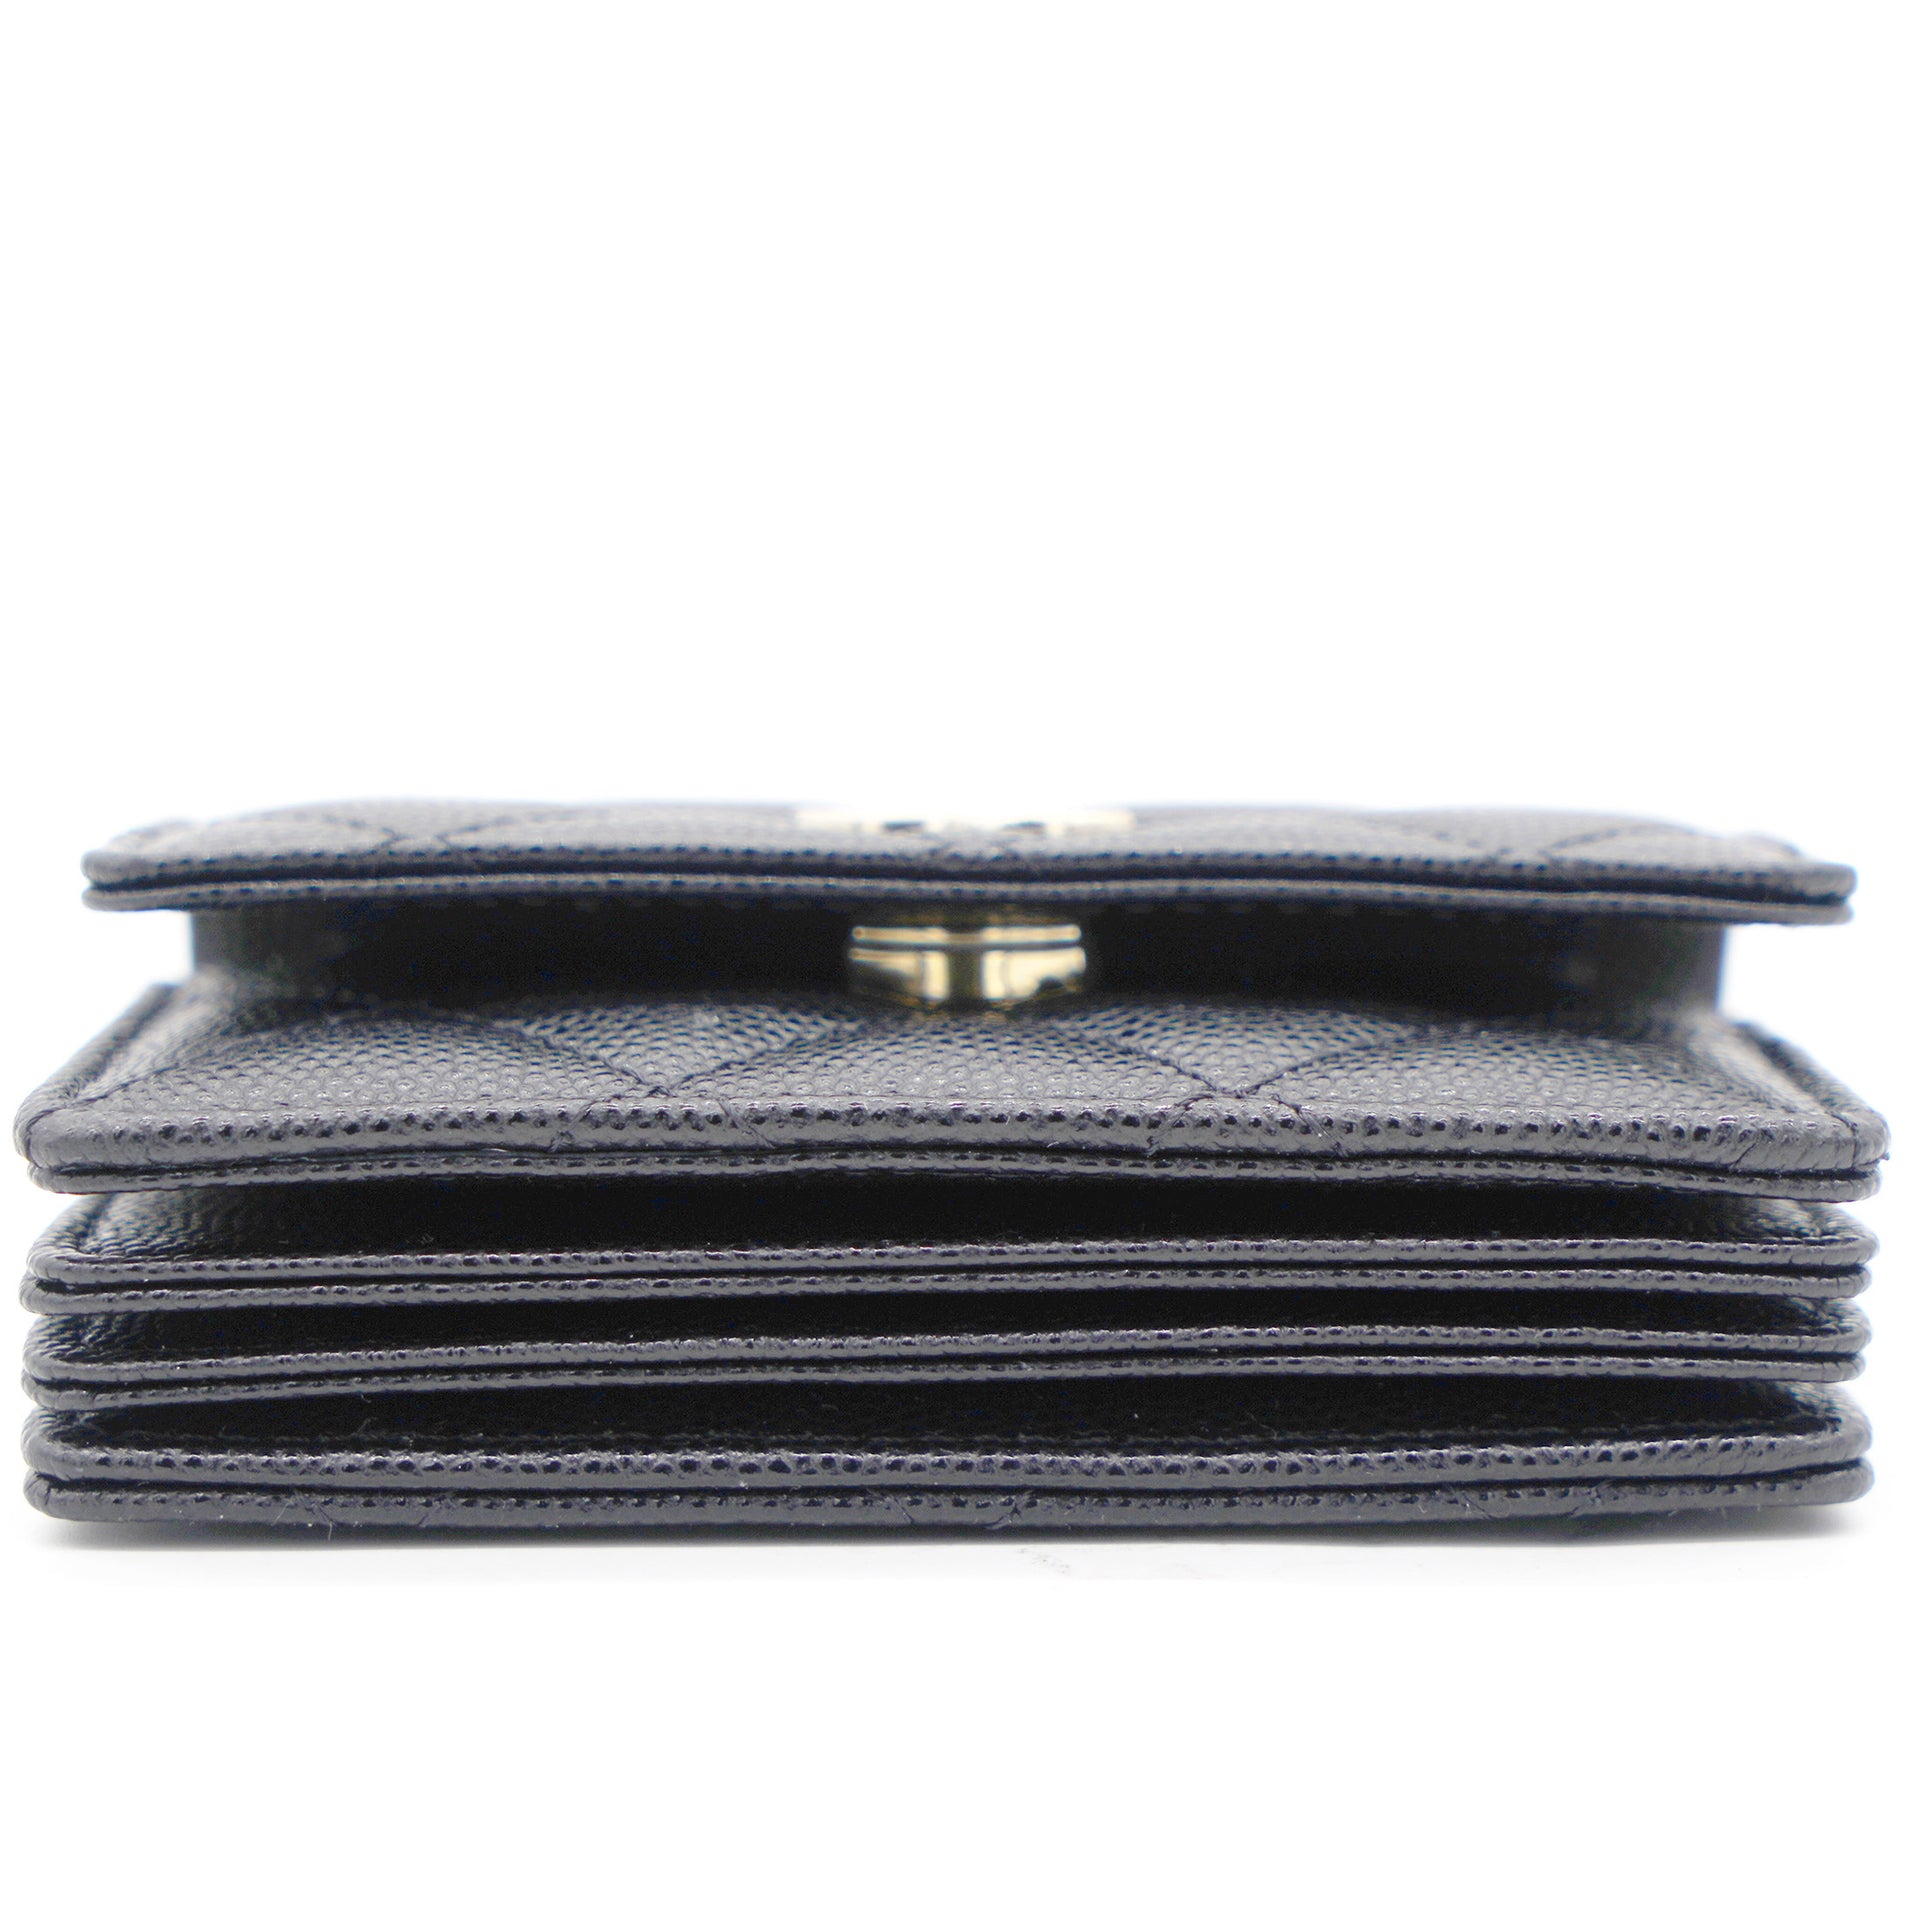 chanel caviar quilted flap card holder wallet black